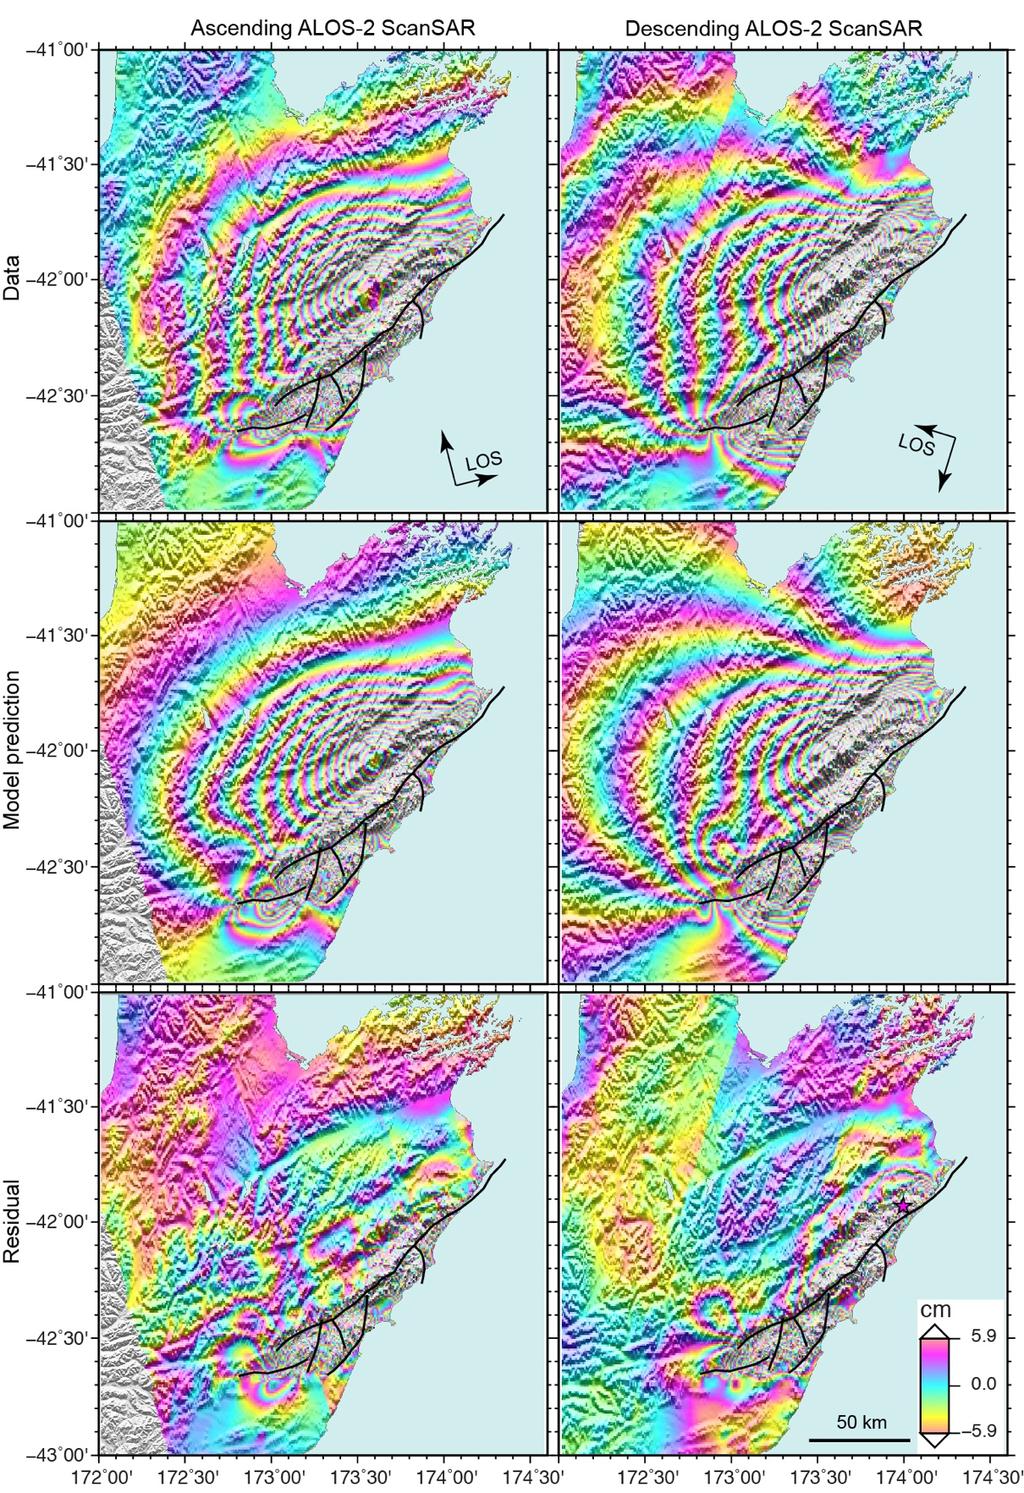 Figure S4 Coseismic ALOS-2 data of the 2016 Kaikoura earthquake and the modelling result. First row: Observed line-of-sight (LOS) displacement map.